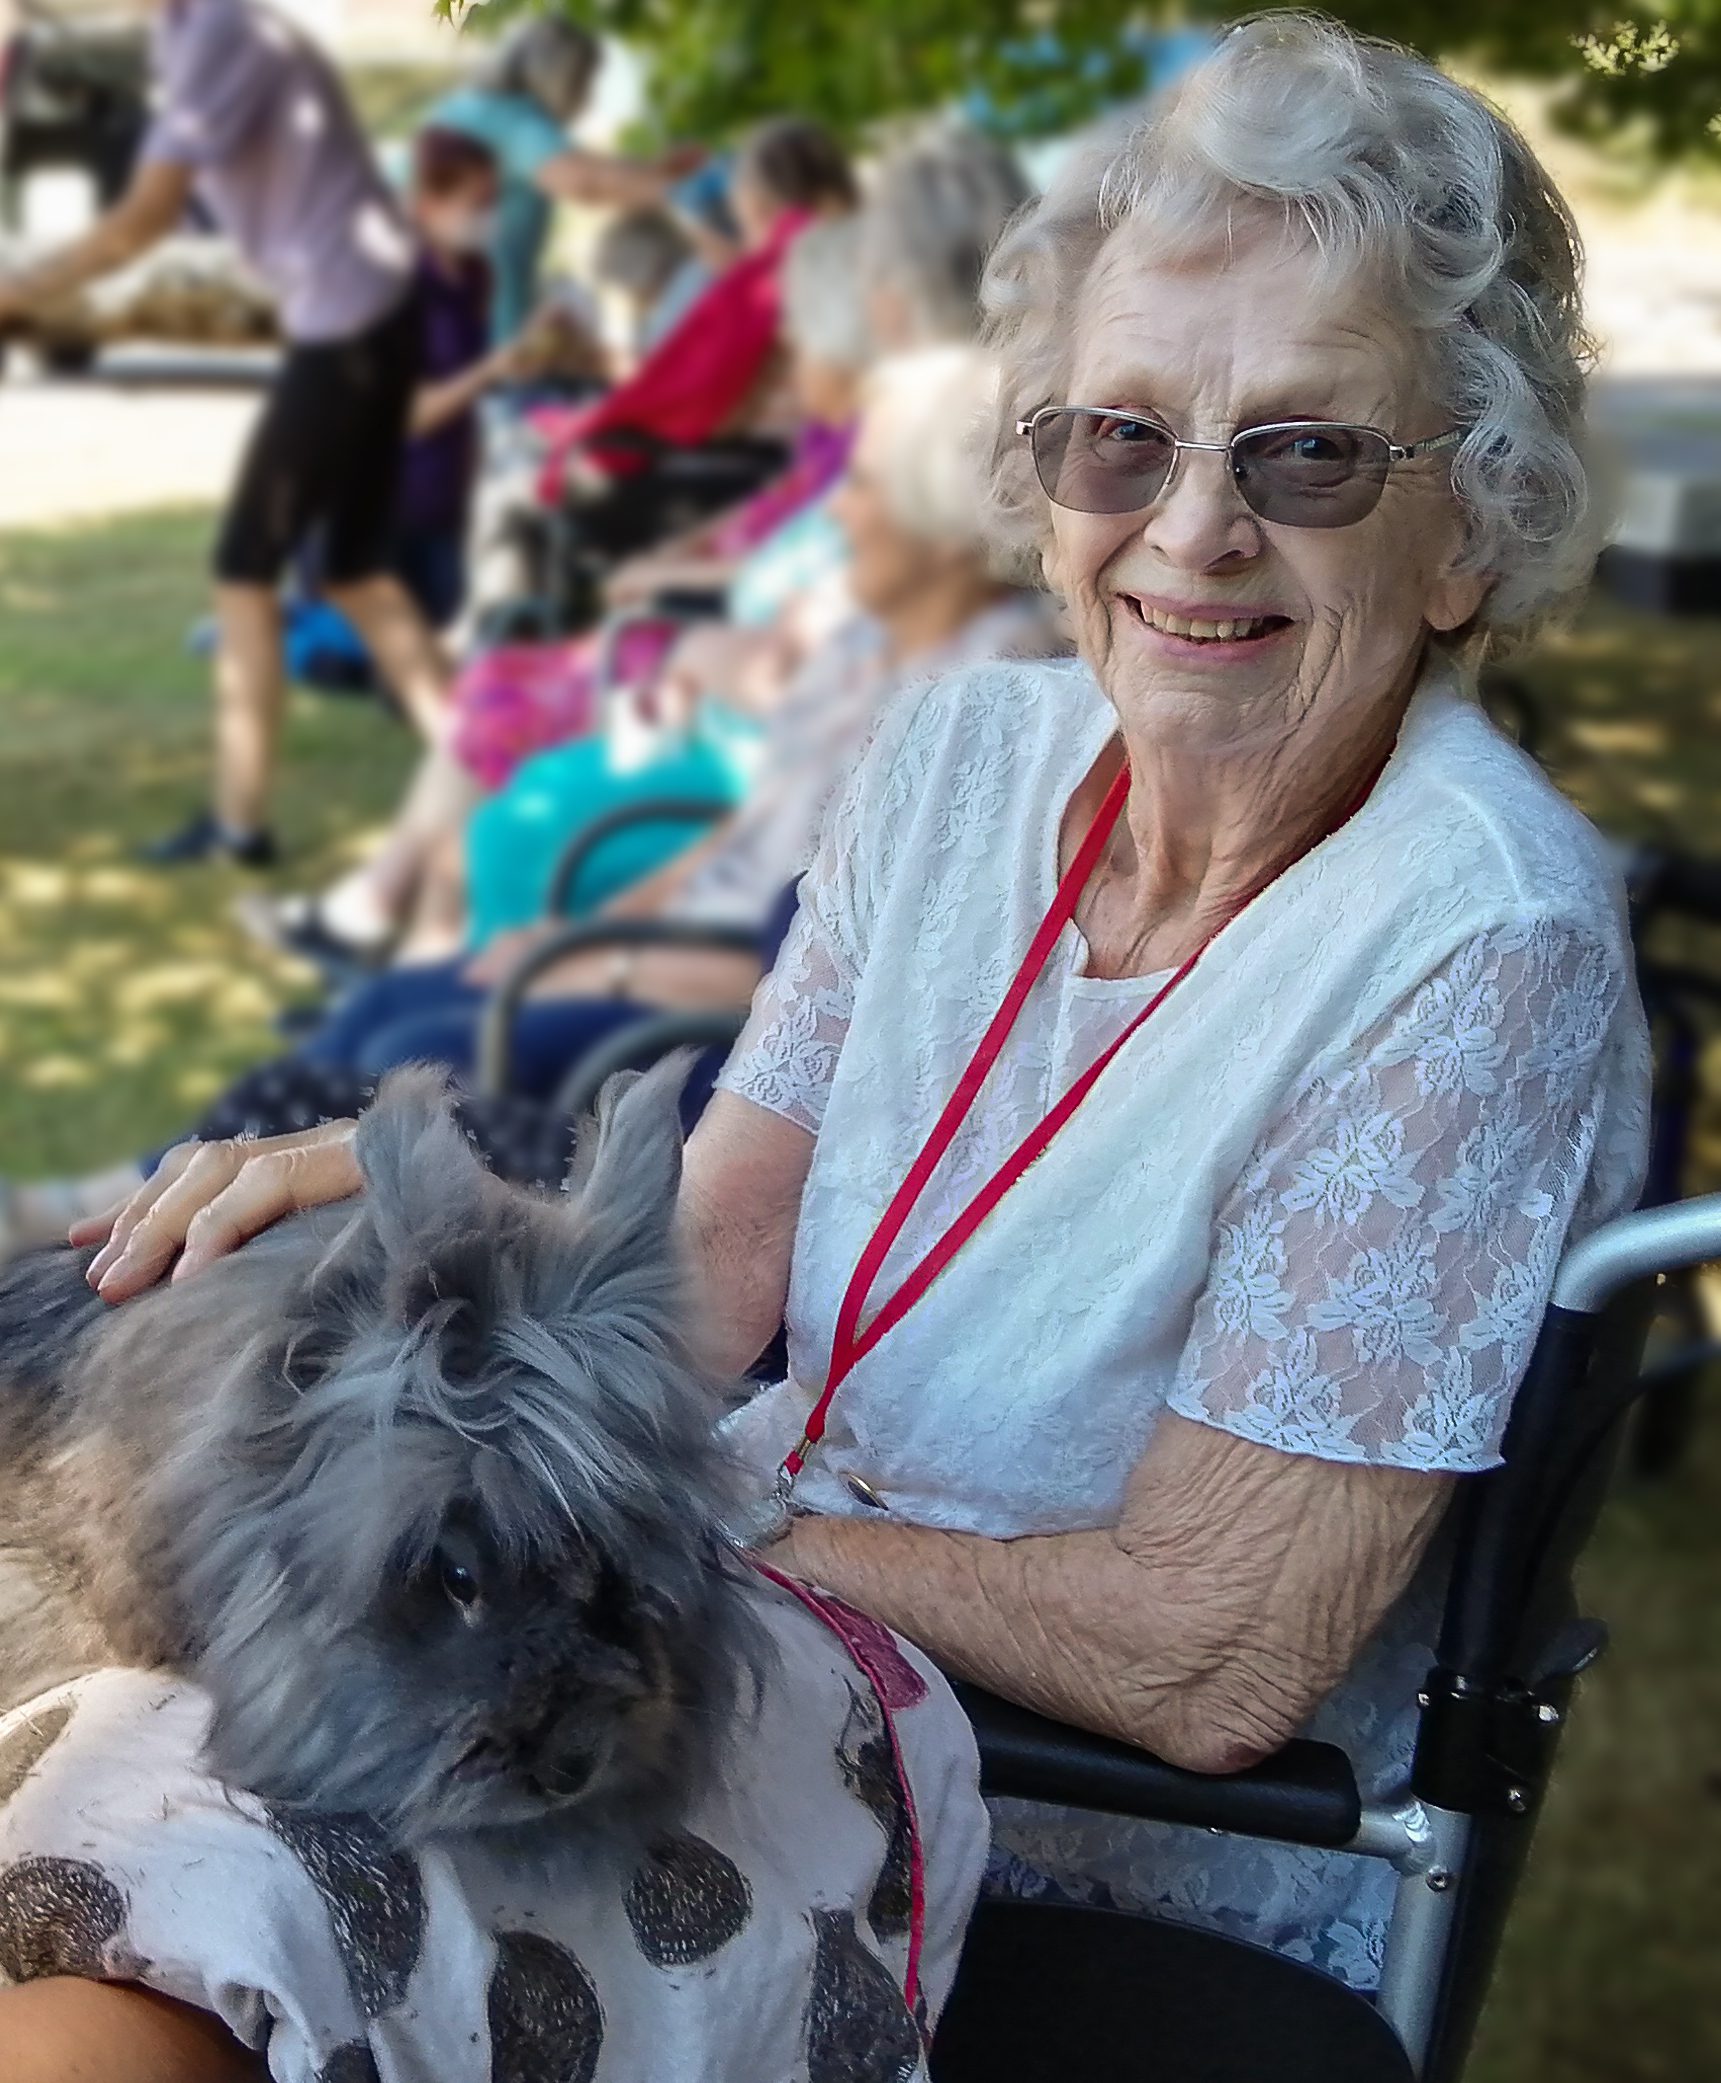 RNNH Resident with a rabbit from Creature Teachers on her lap